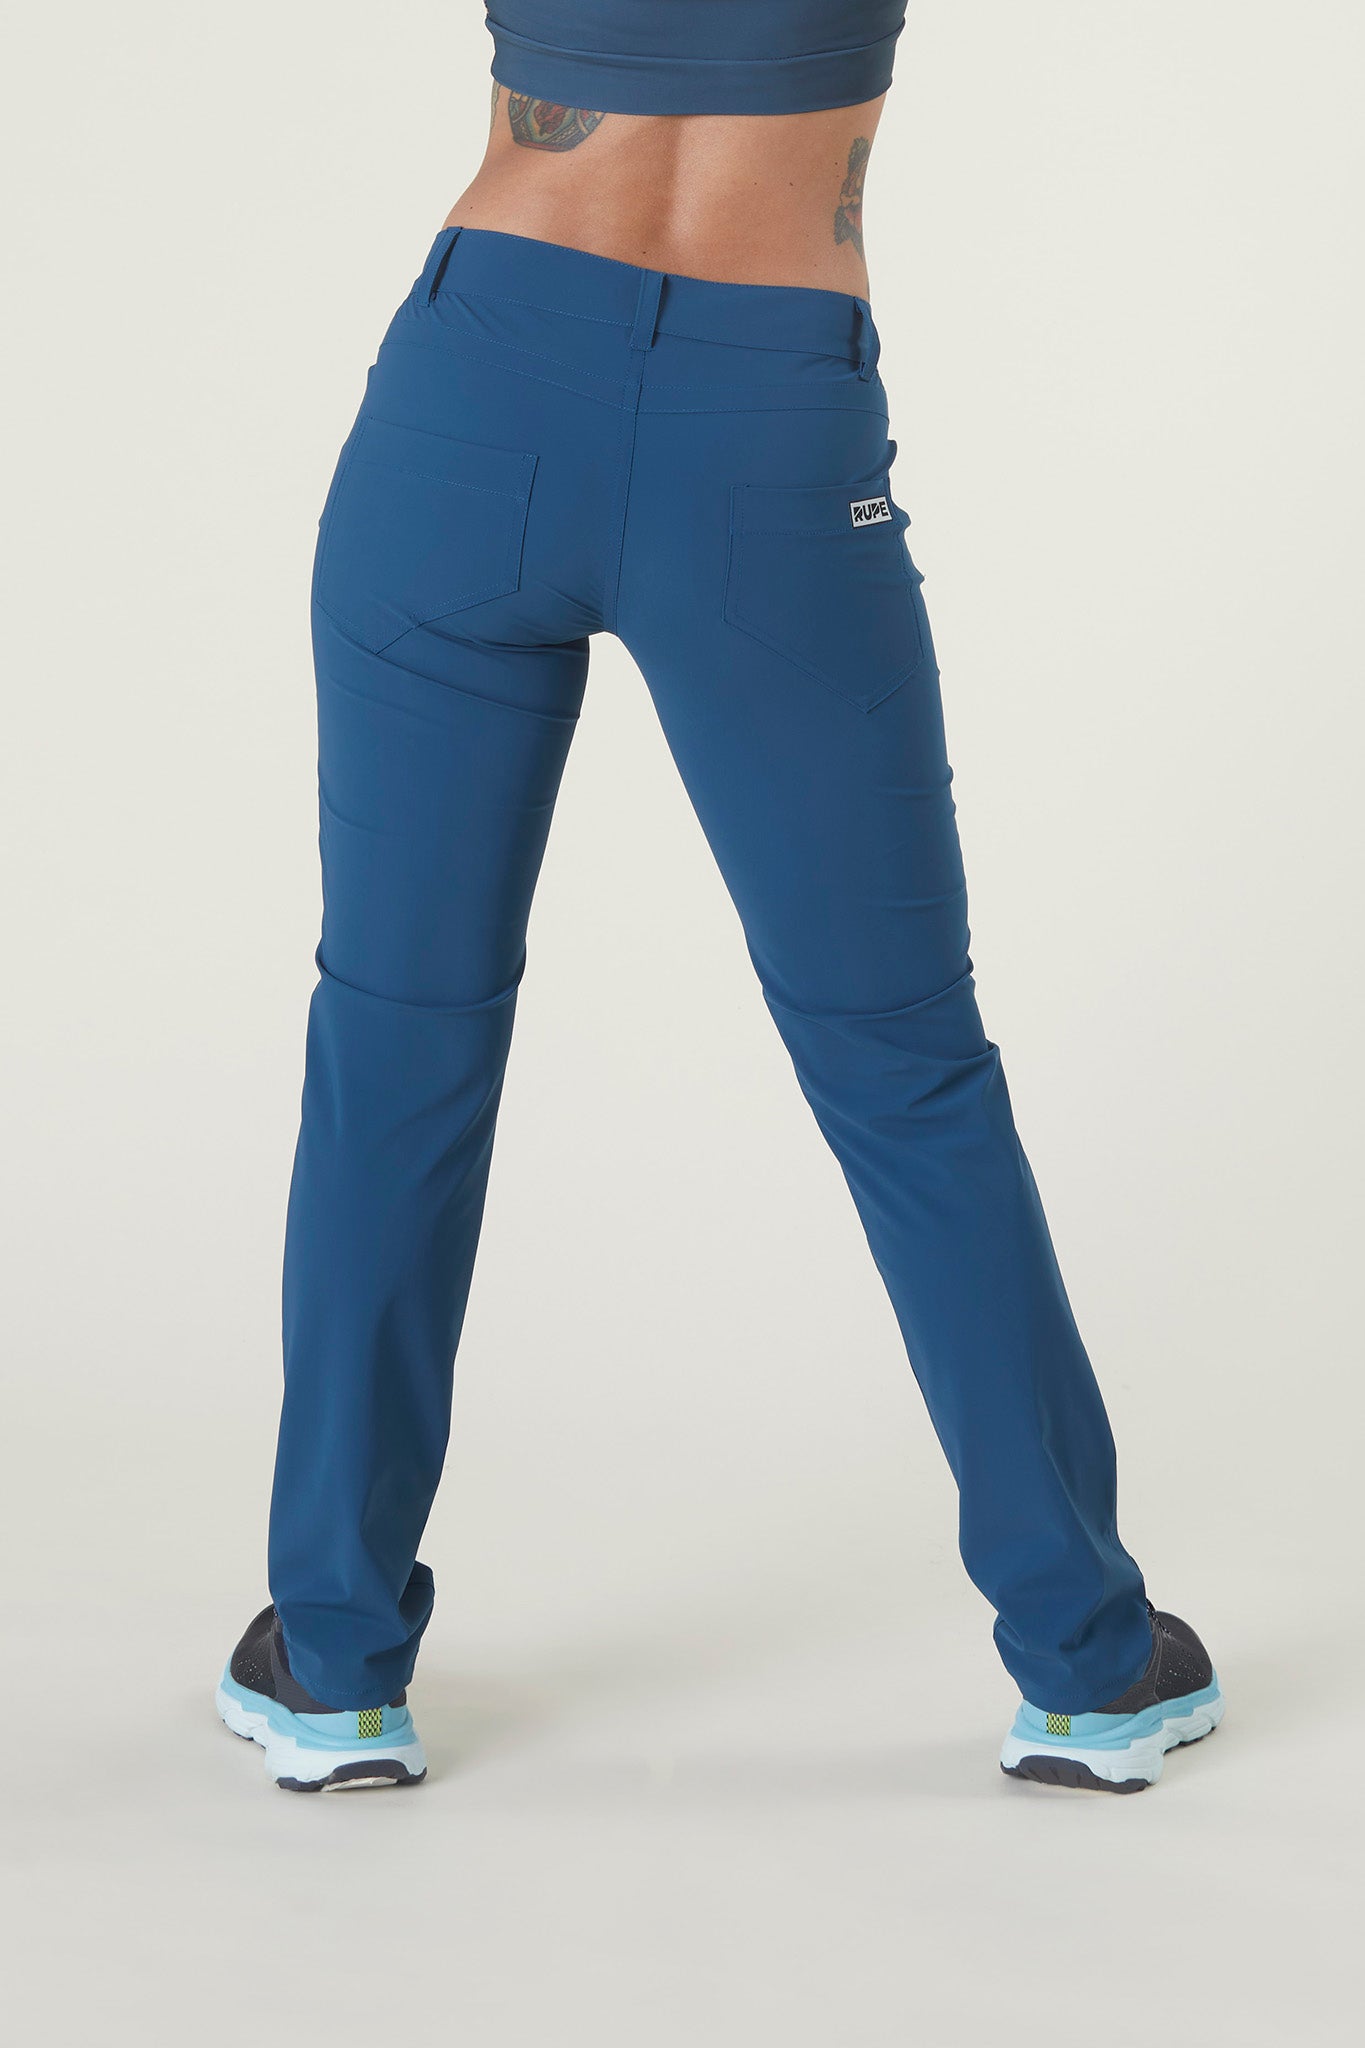 Women's Climbing Pants ANDE - Teal | Rupe PRO Line 